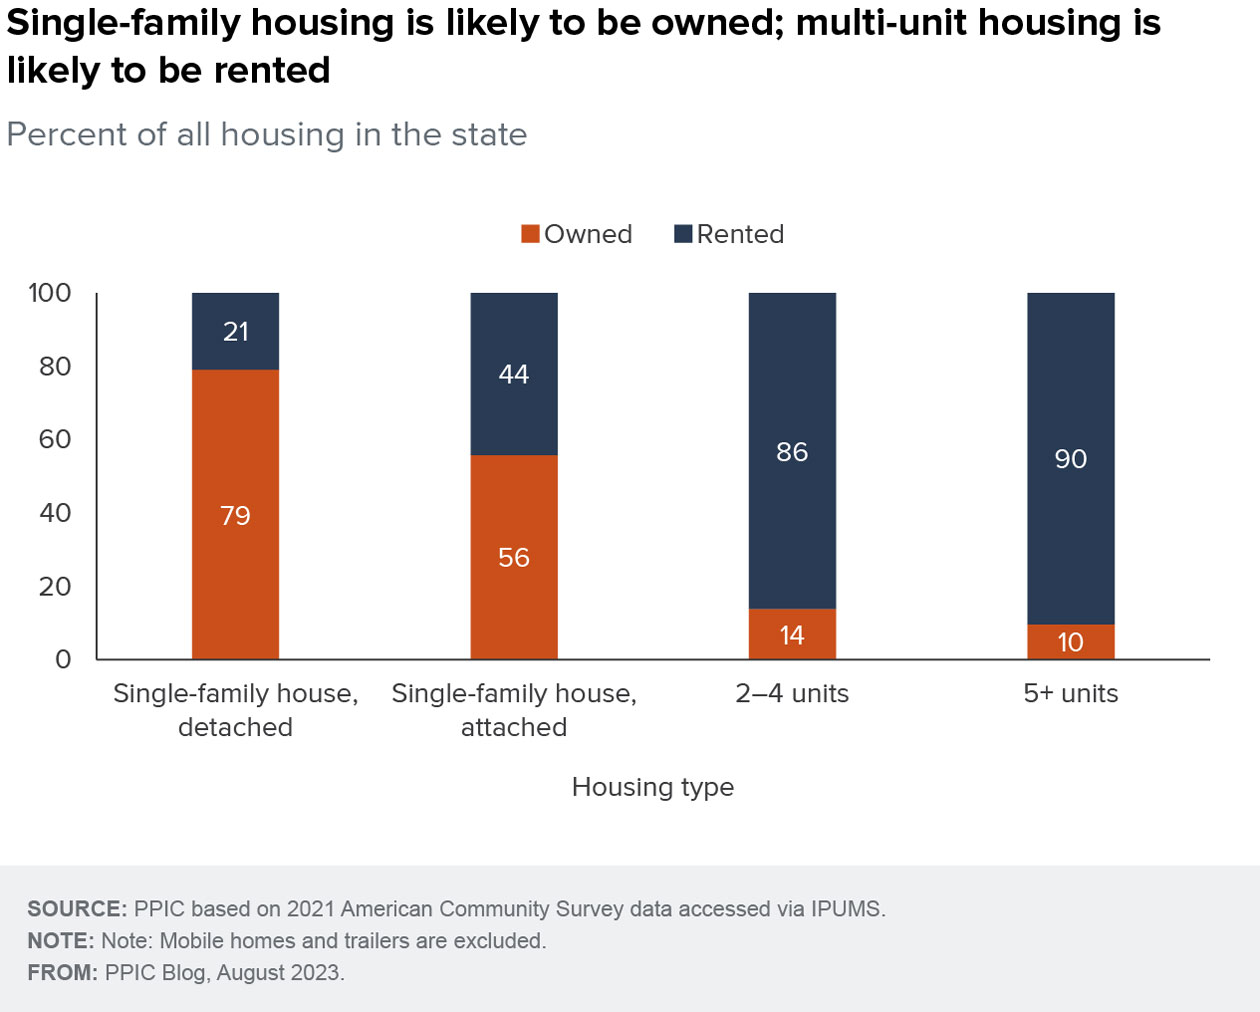 figure -Single-family housing is likely to be owned; multi-unit housing is likely to be rented